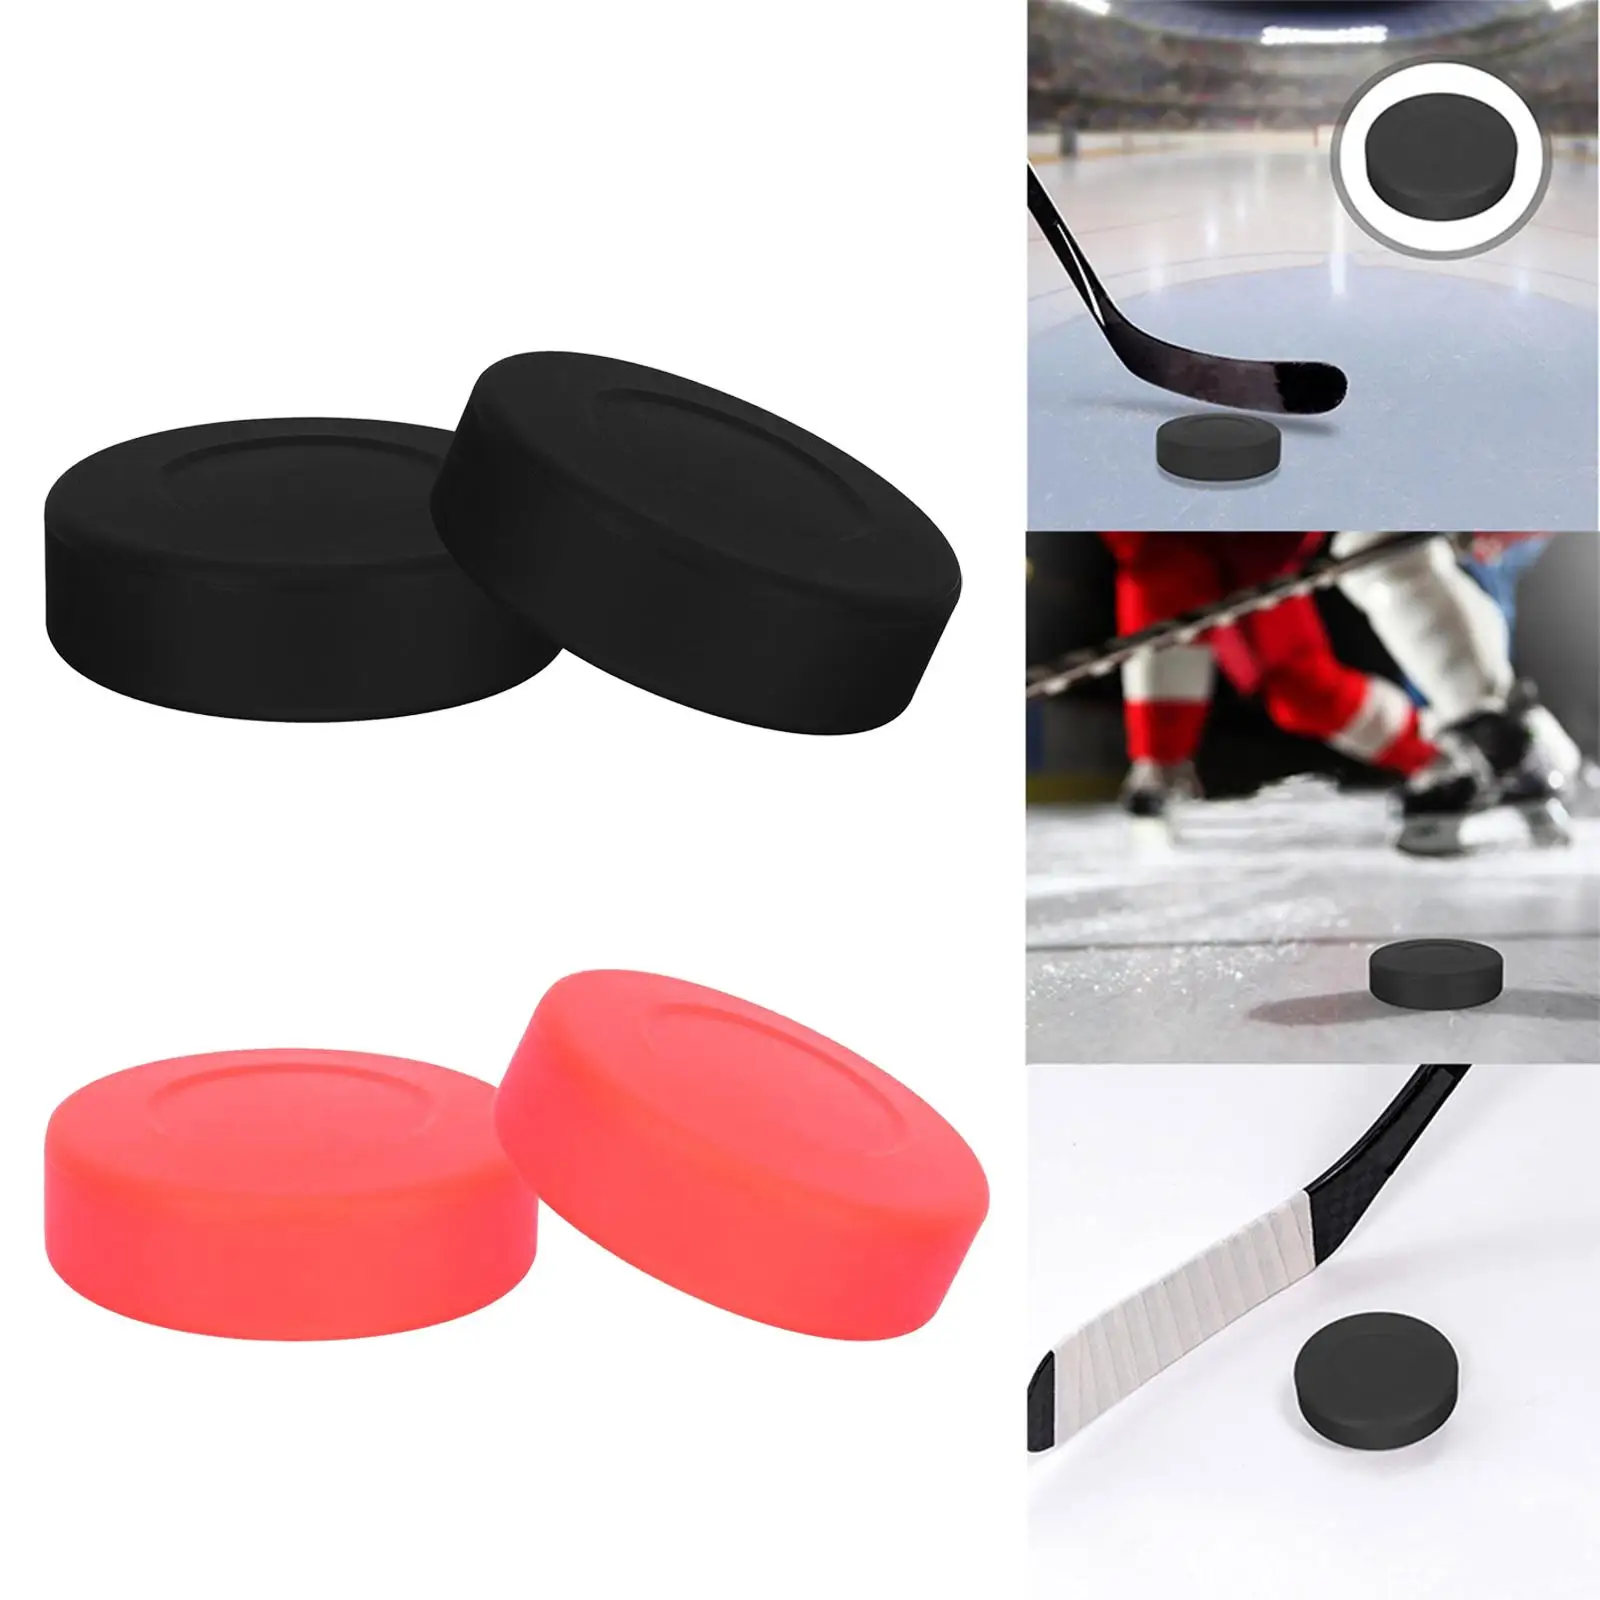 2 Pieces Ice Hockey Puck Multipurpose Sturdy Simple to Use Hockey Ball for Athletes Children Starters Competition Training